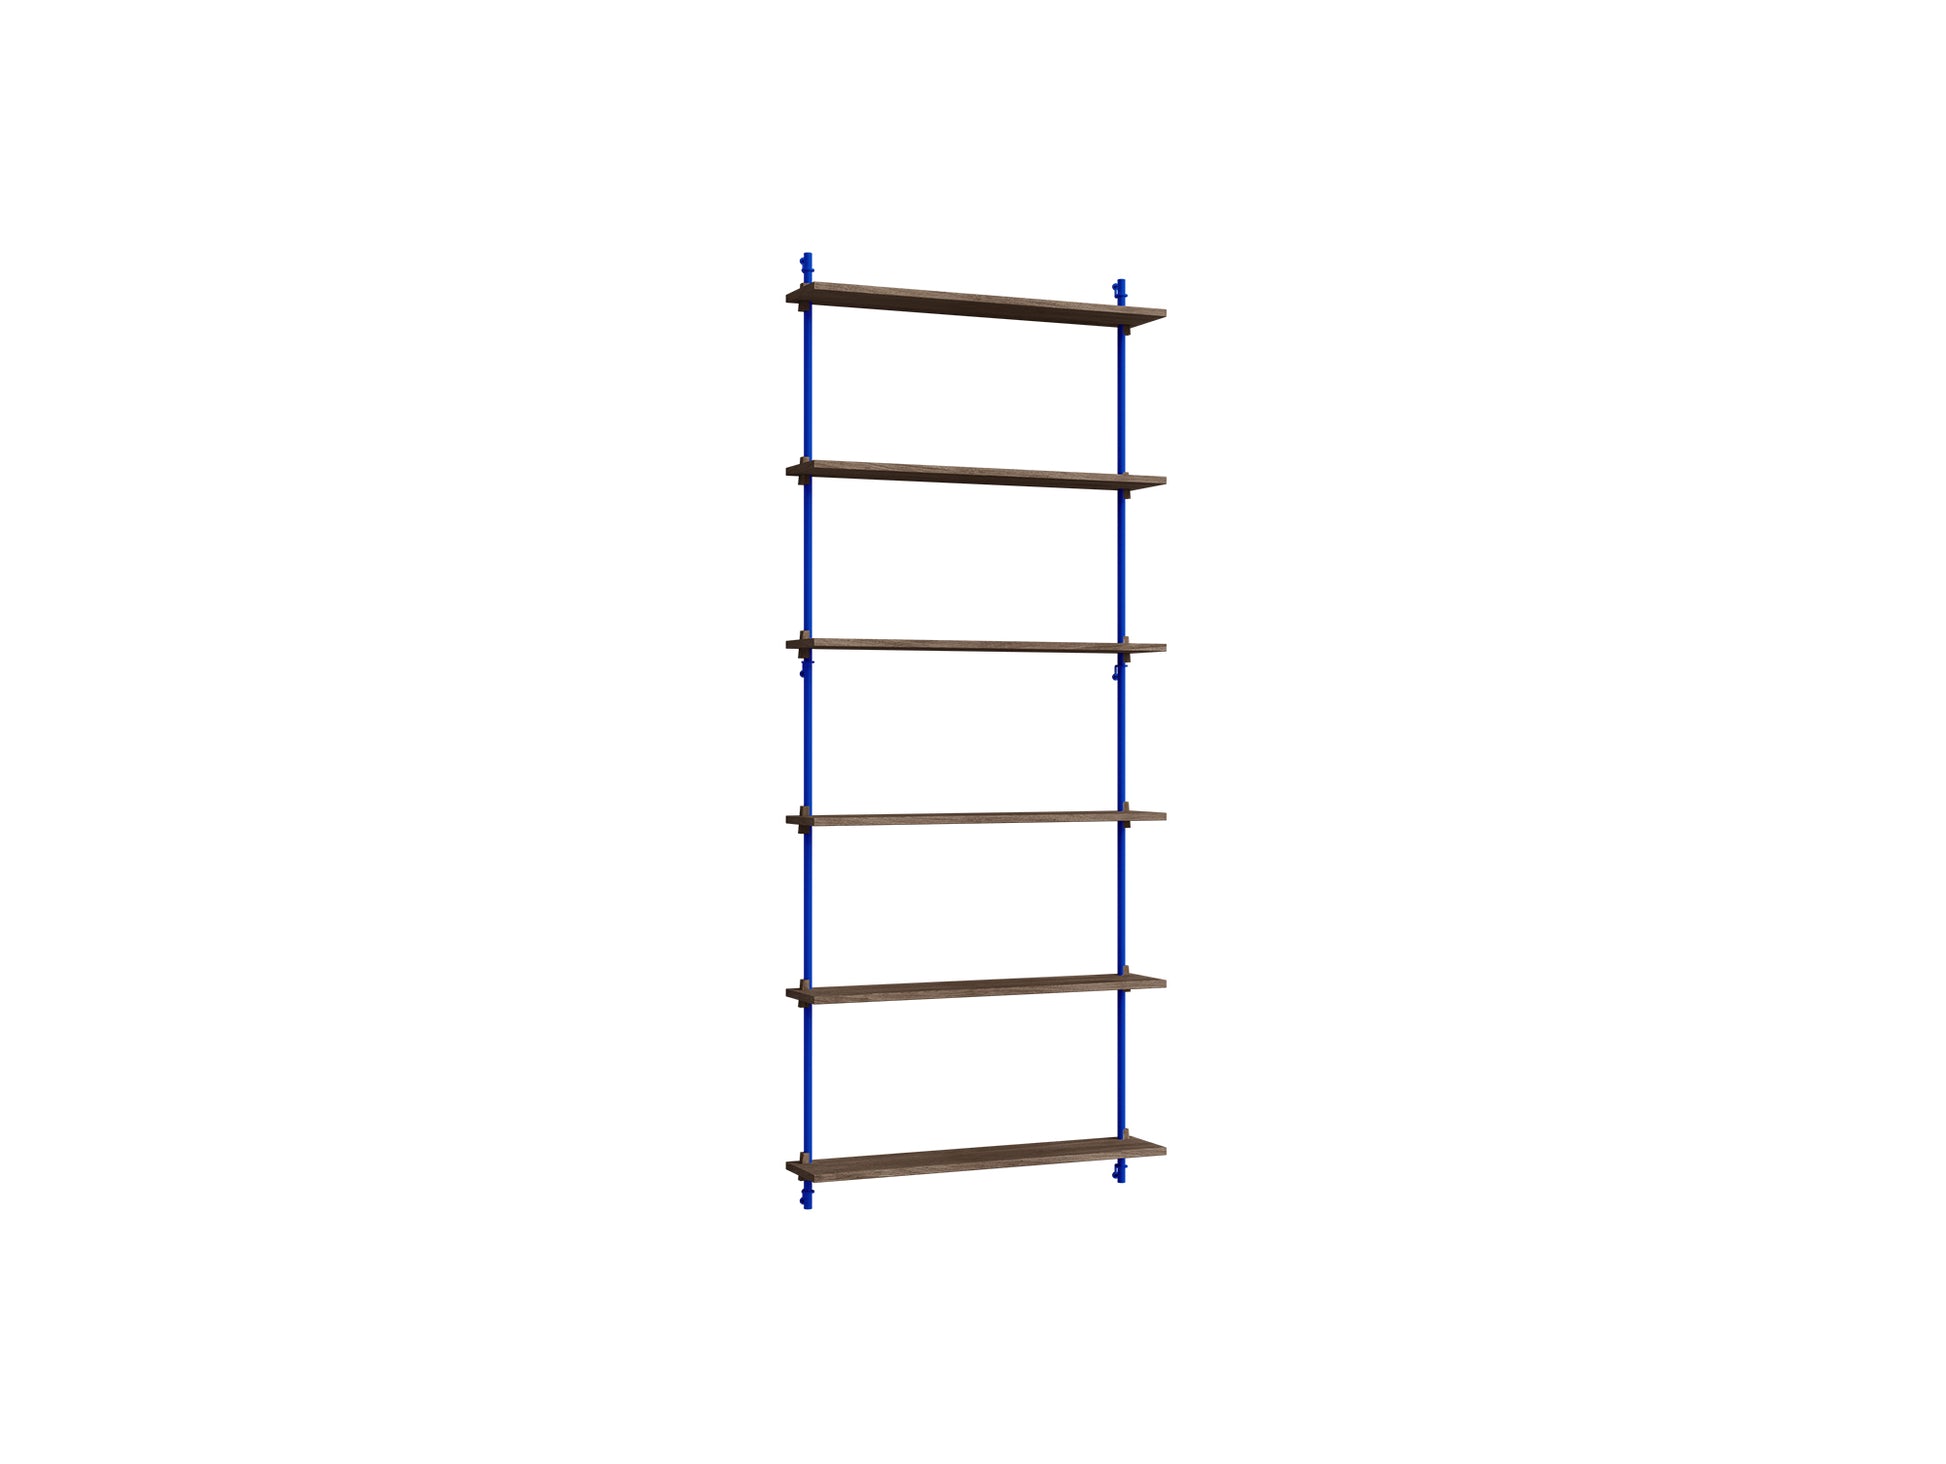 Wall Shelving System Sets (200 cm) by Moebe - WS.200.1 / Deep Blue Uprights / Smoked Oak